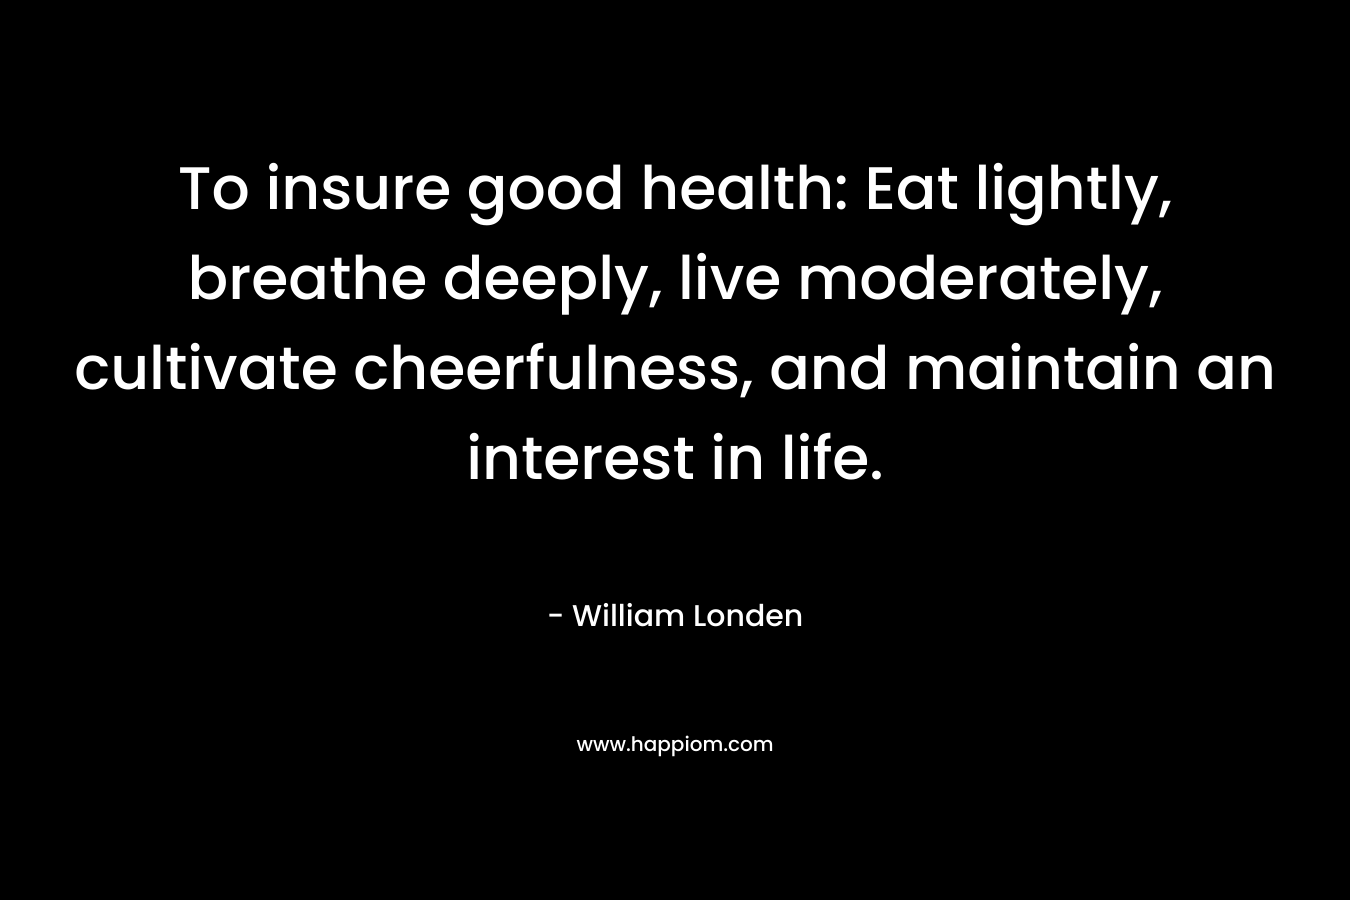 To insure good health: Eat lightly, breathe deeply, live moderately, cultivate cheerfulness, and maintain an interest in life.